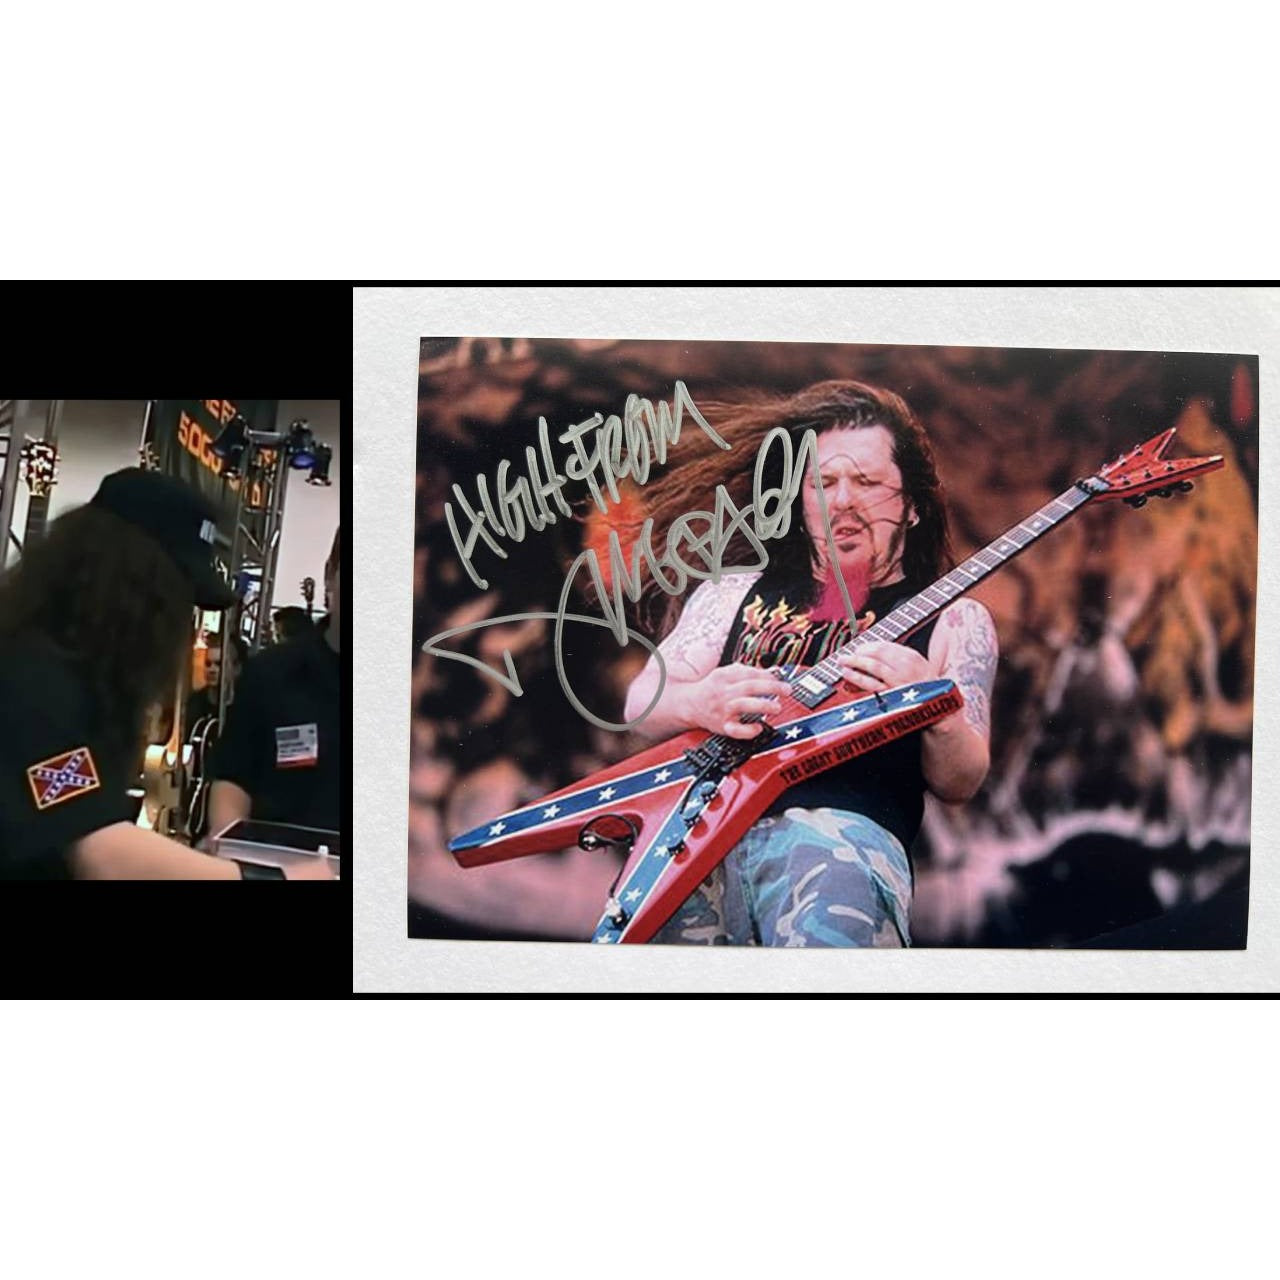 Dimebag Darrell Abbott 5x7 photo signed with proof